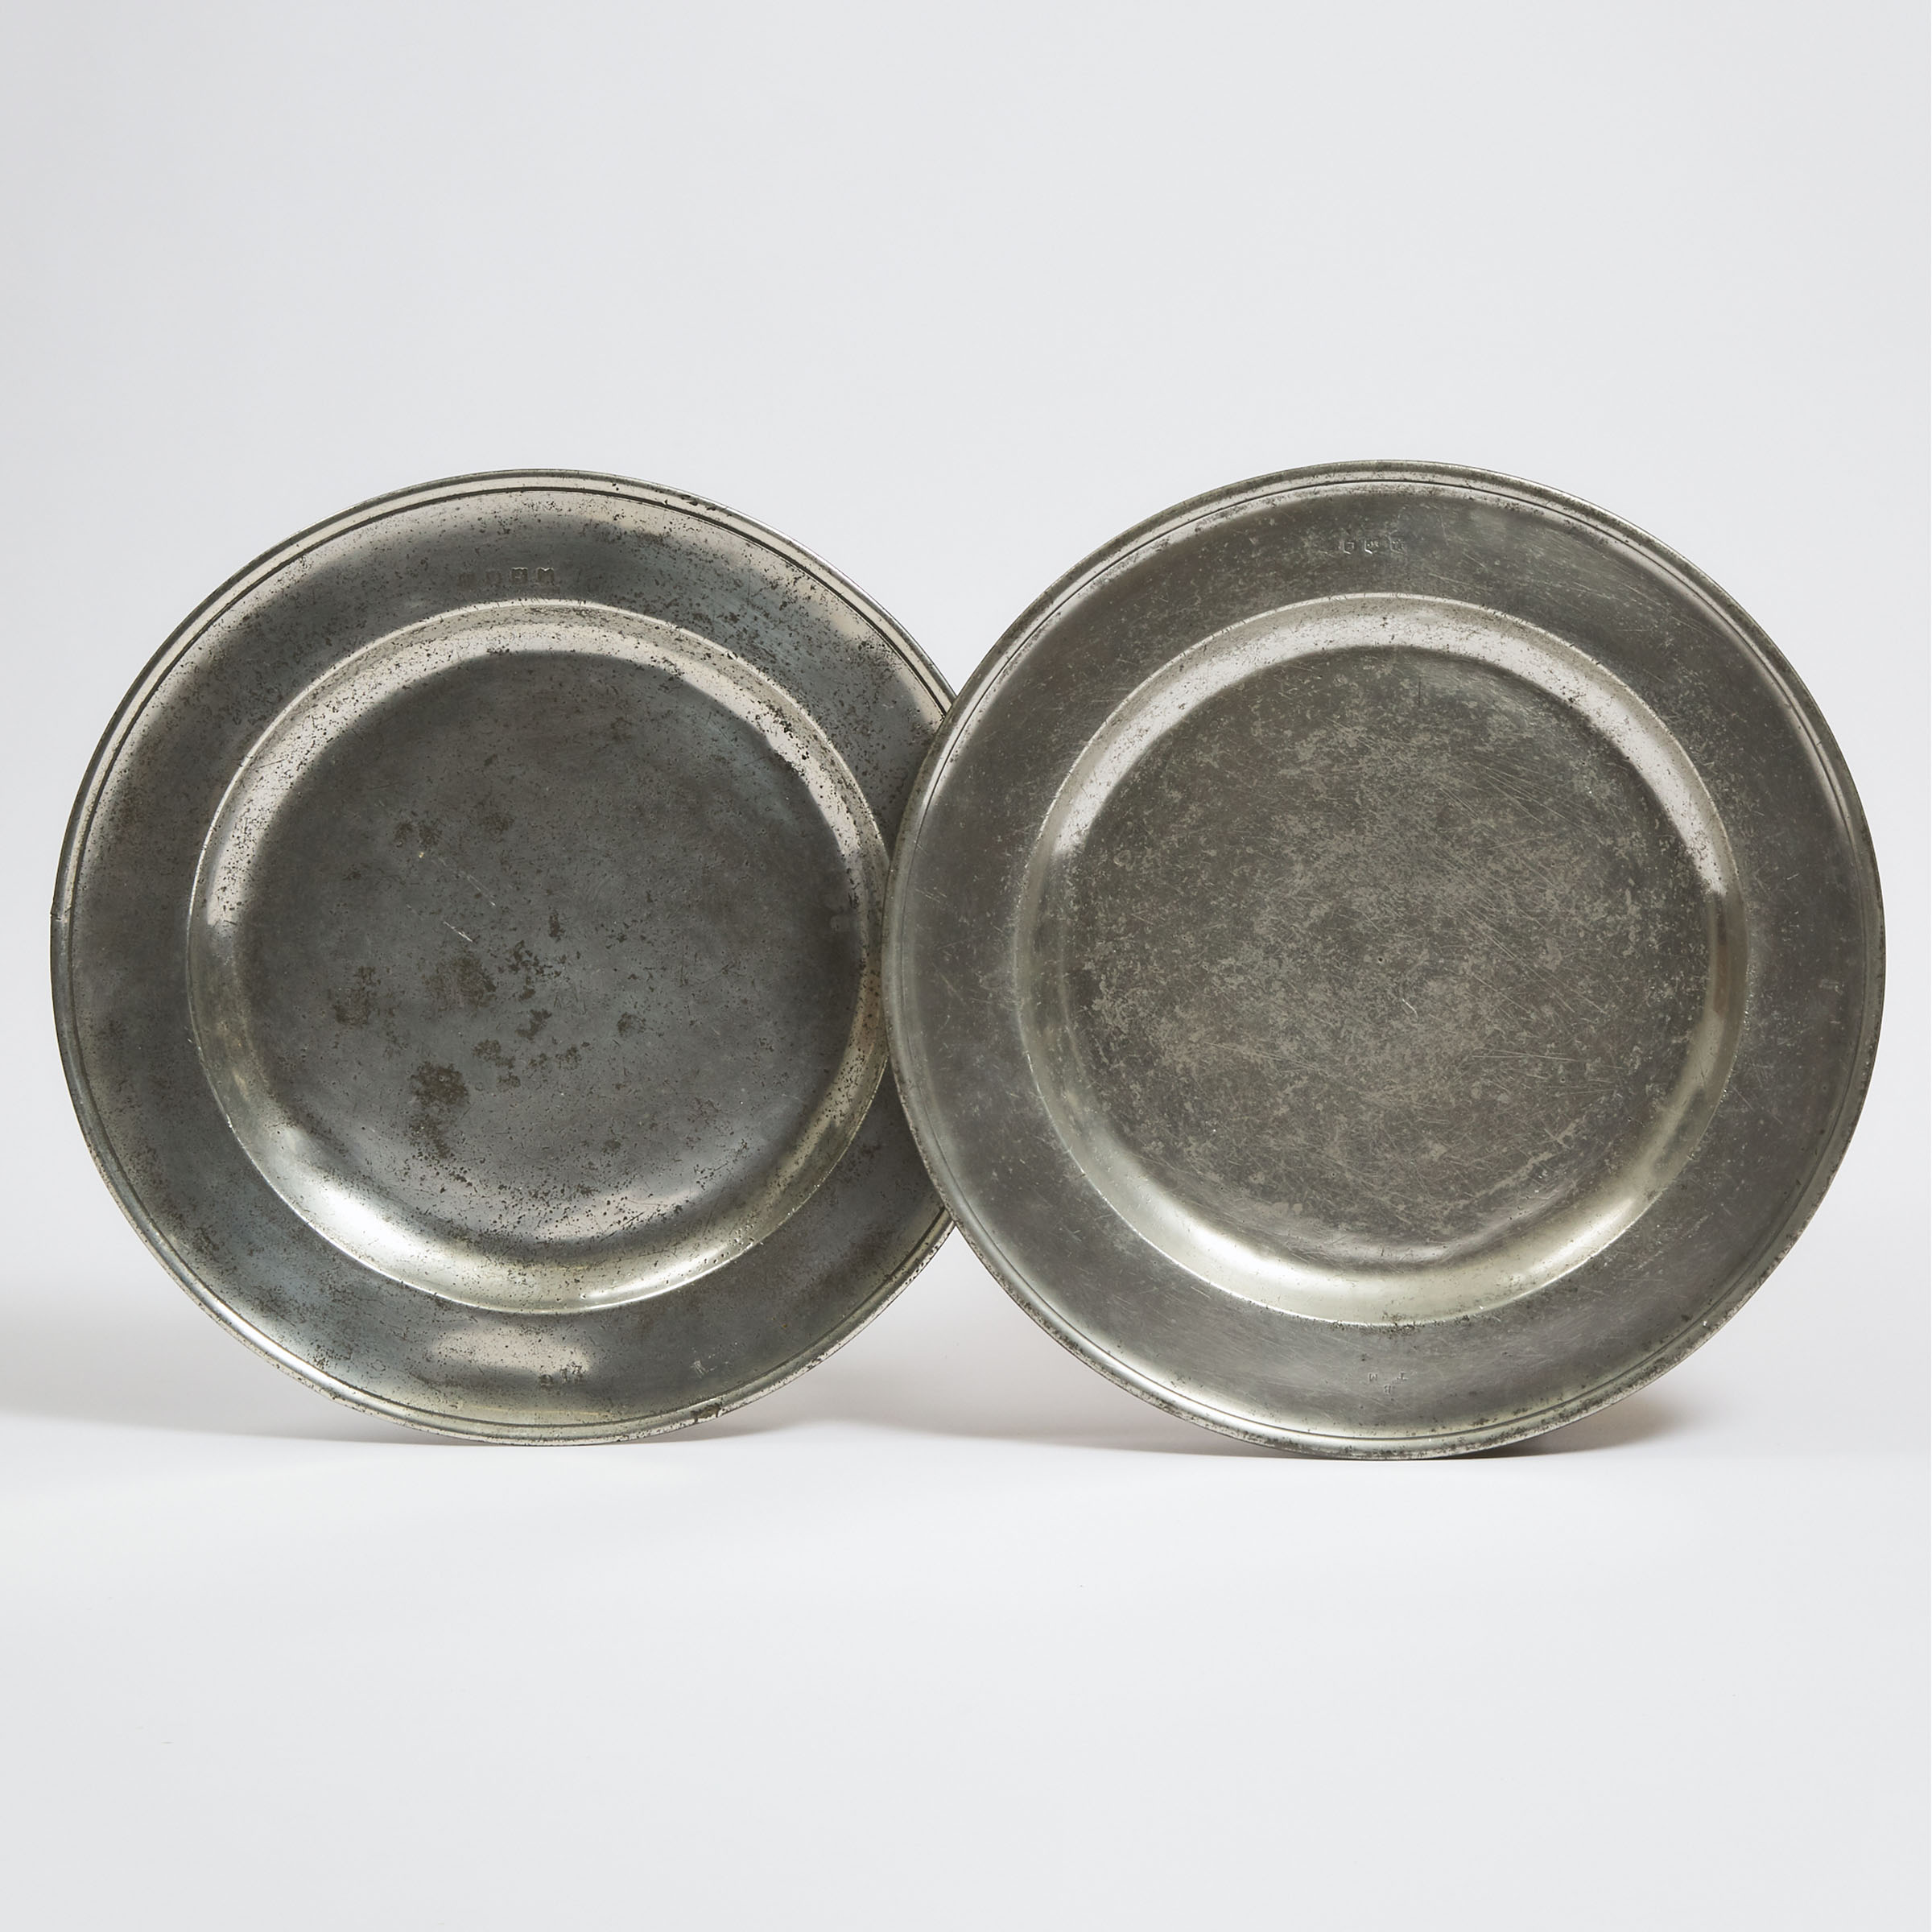 Two English Pewter Dishes, early 18th century